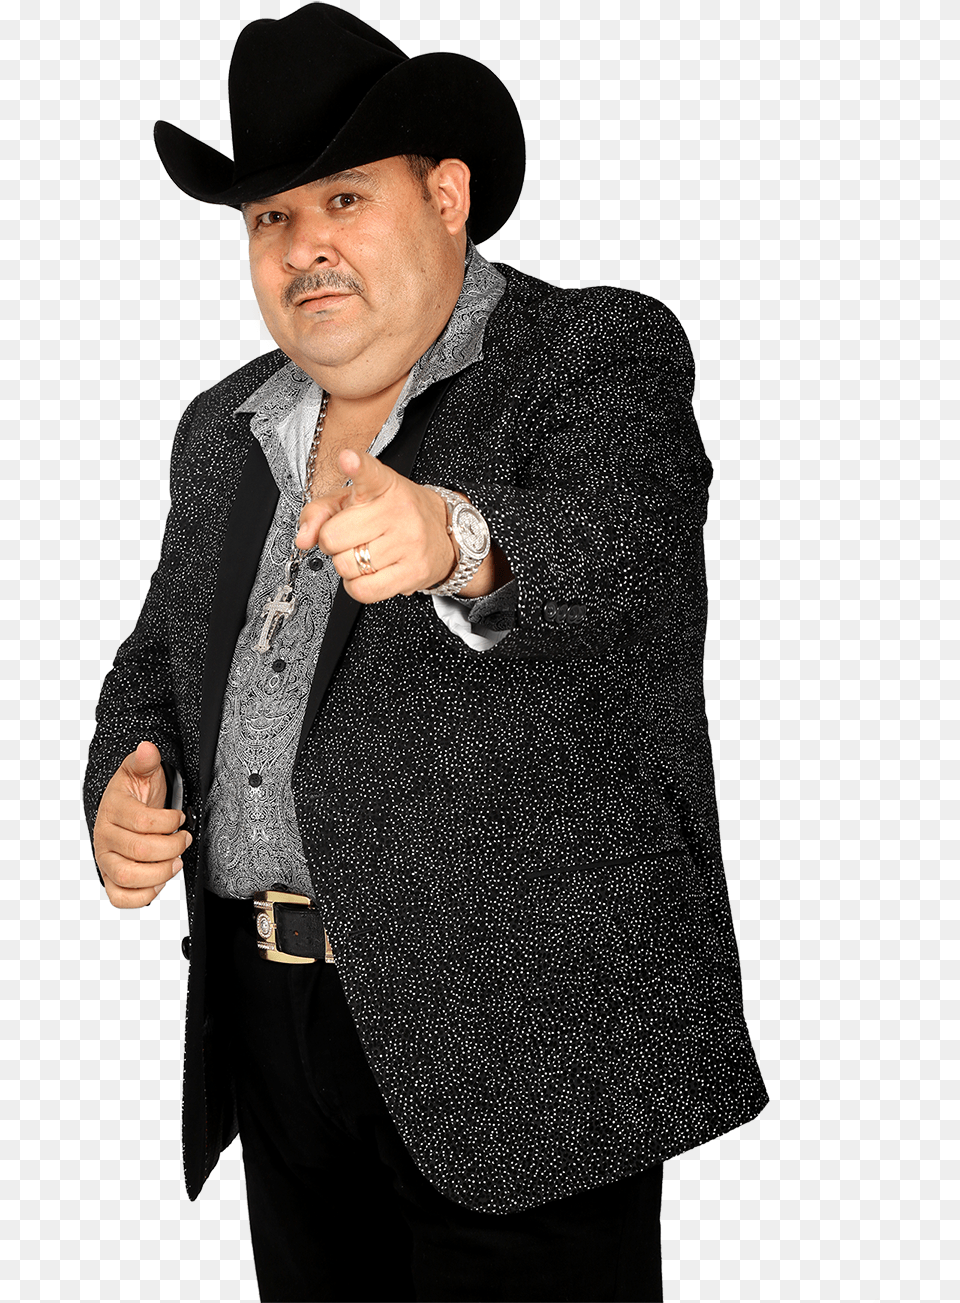 El Coyoteclass Img Responsive Owl First Image Owl Jose Angel Ledesma Coyote, Suit, Person, Hat, Hand Free Transparent Png